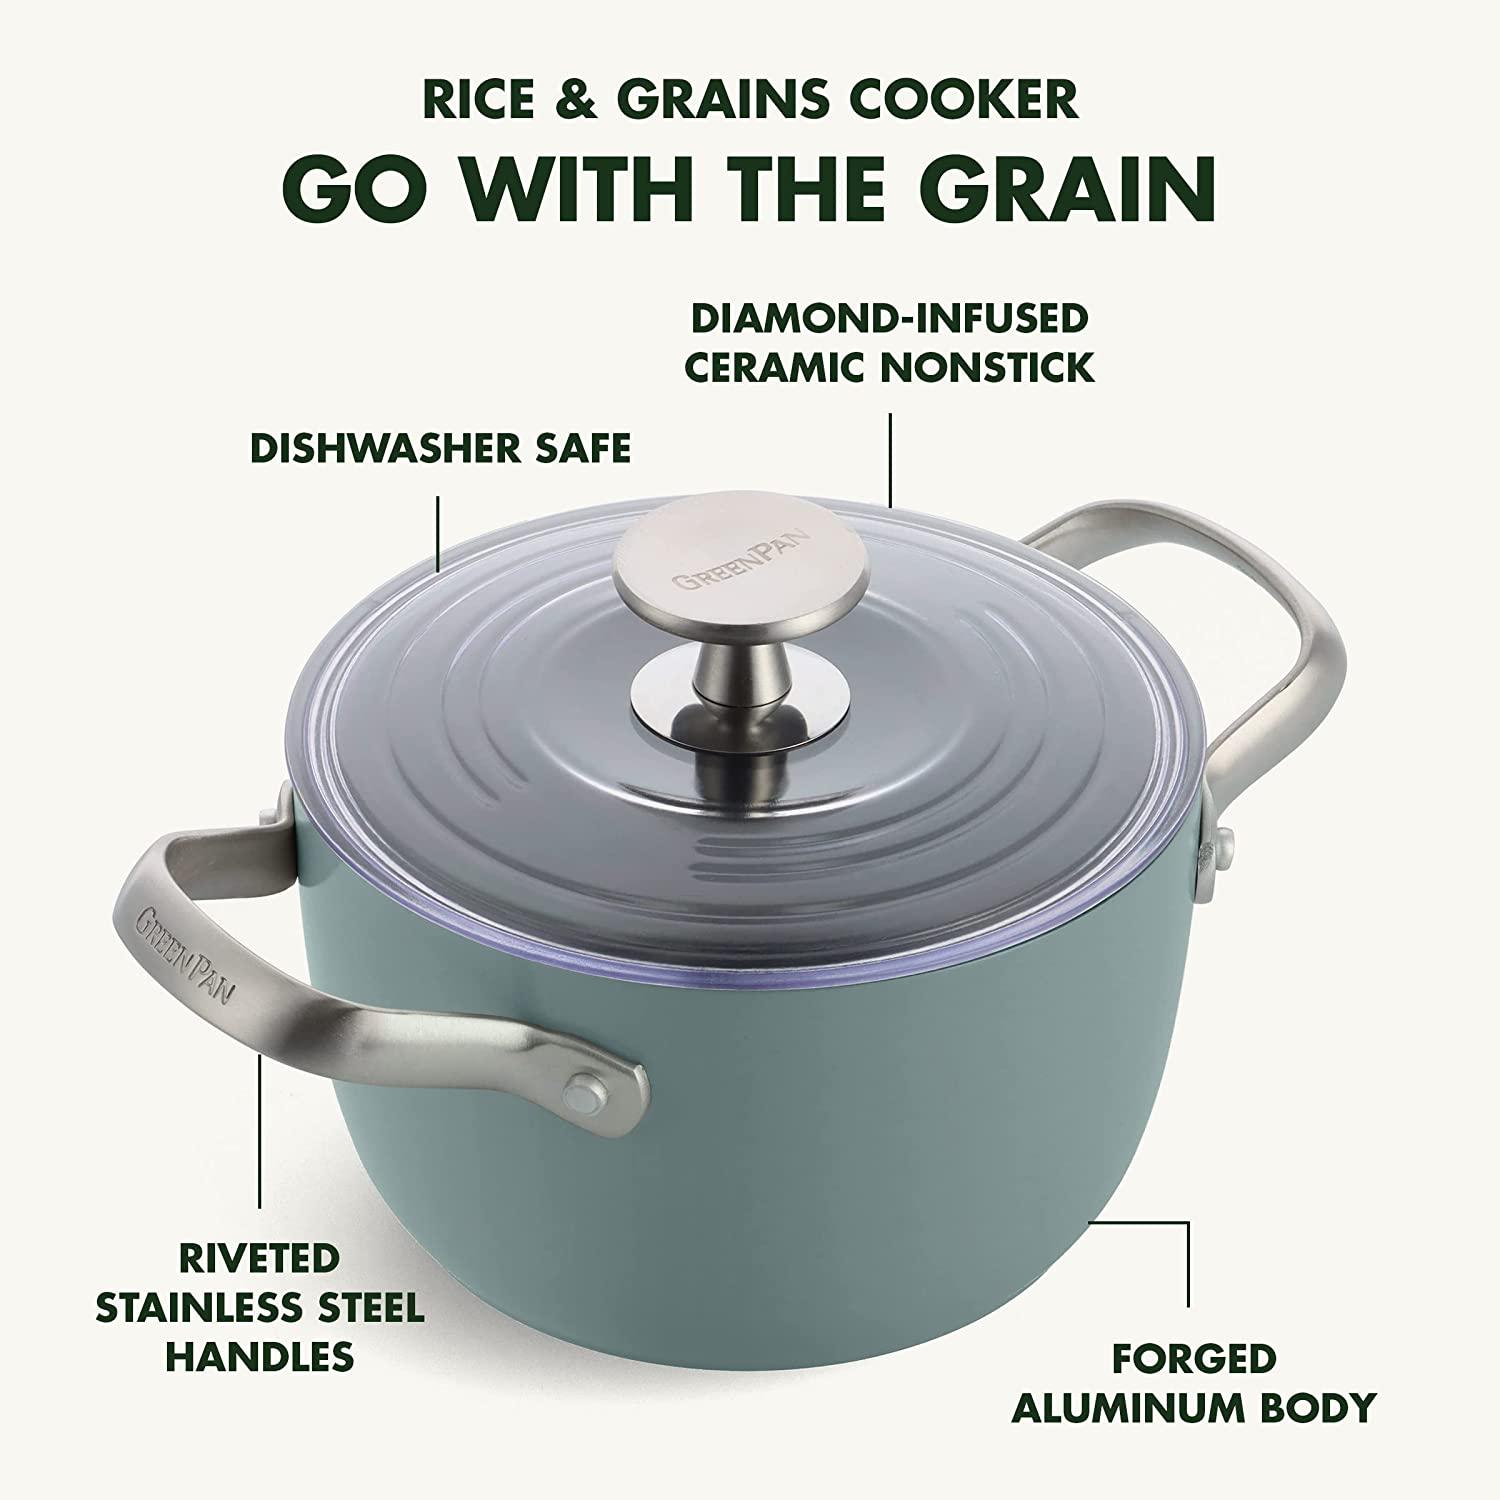 GreenLife Healthy Ceramic Nonstick Rice & Grains Cooker - On Sale